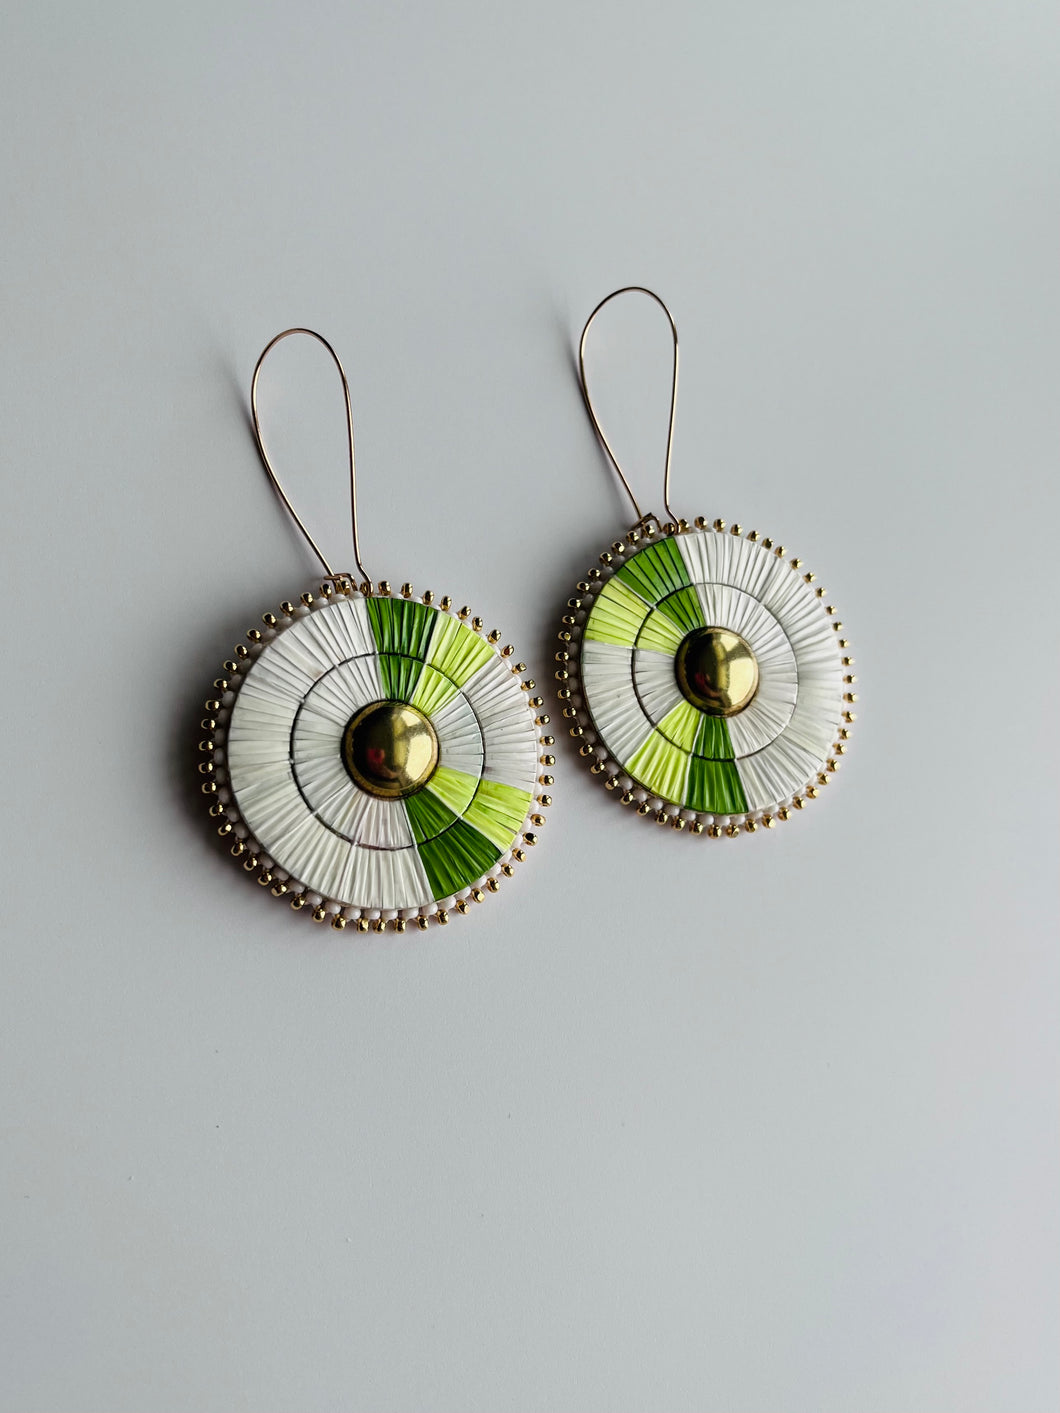 Porcupine Quill 2-Band Earrings + Green Highlight +